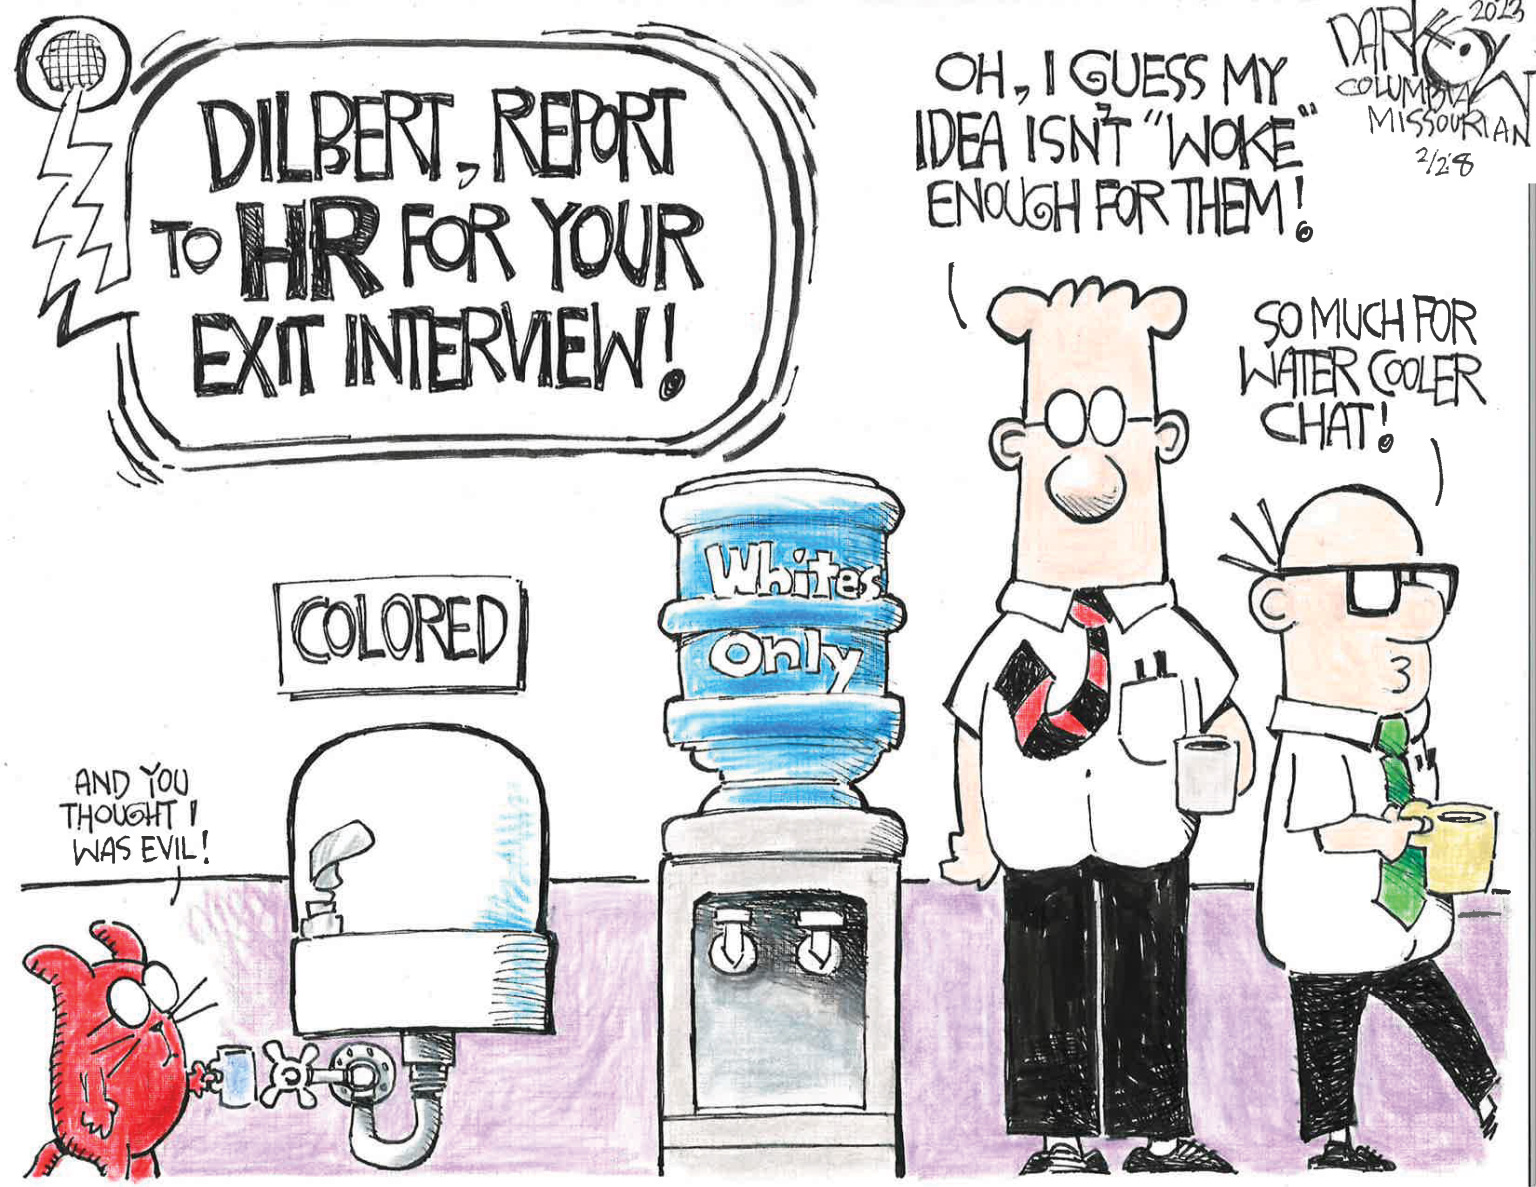 Midland Daily News Is Done With Dilbert Scott Adams